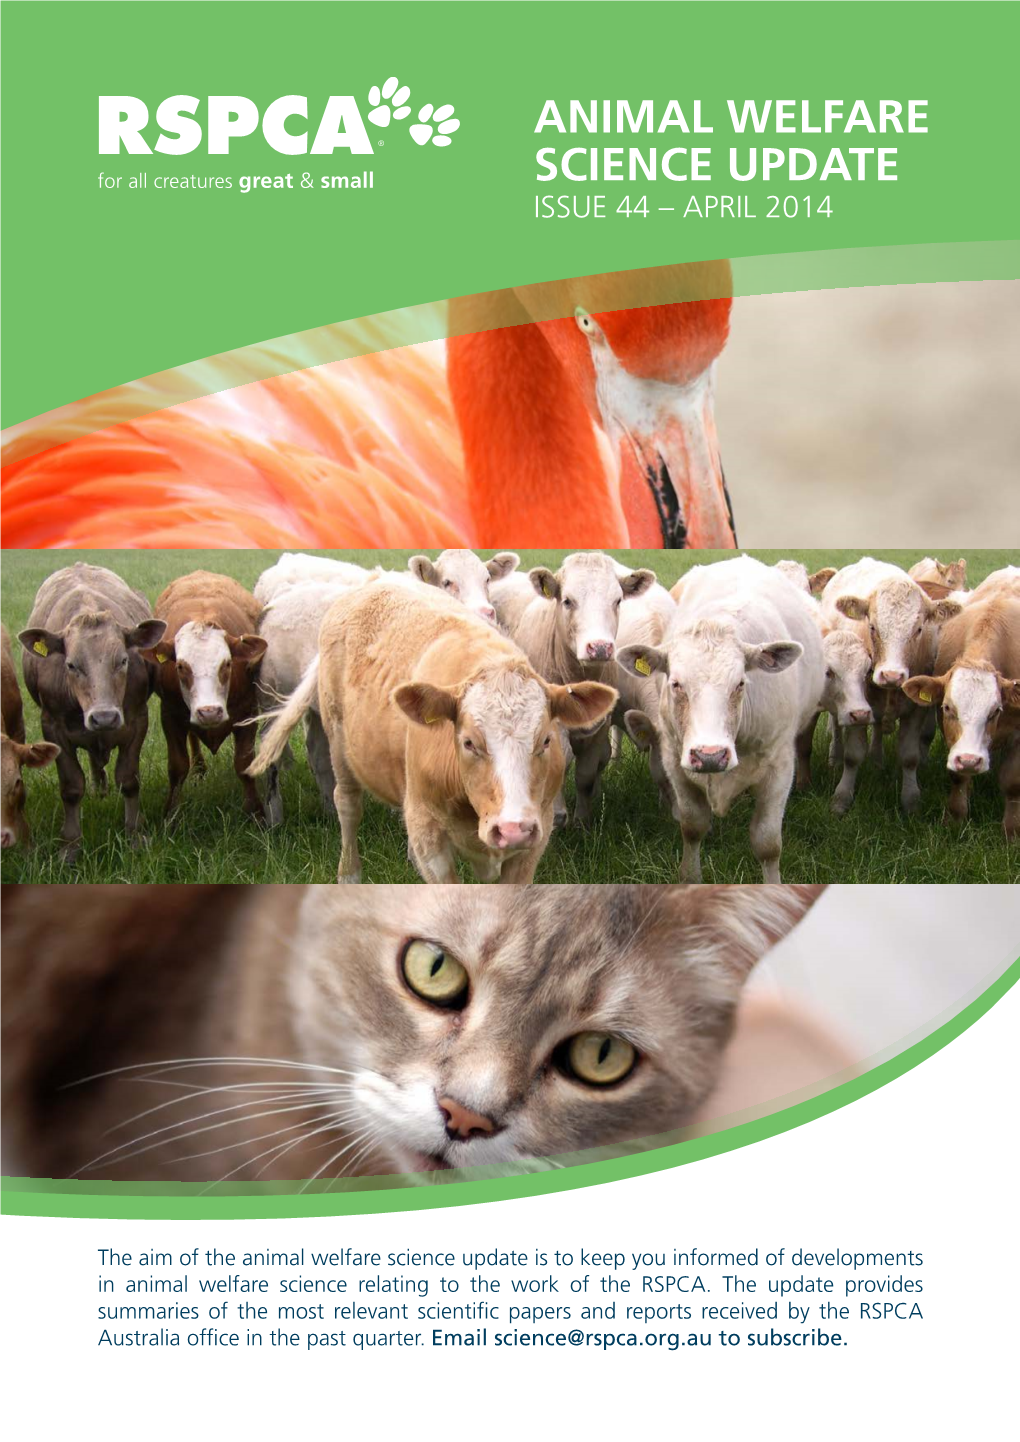 Animal Welfare Science Update Issue 44 – April 2014